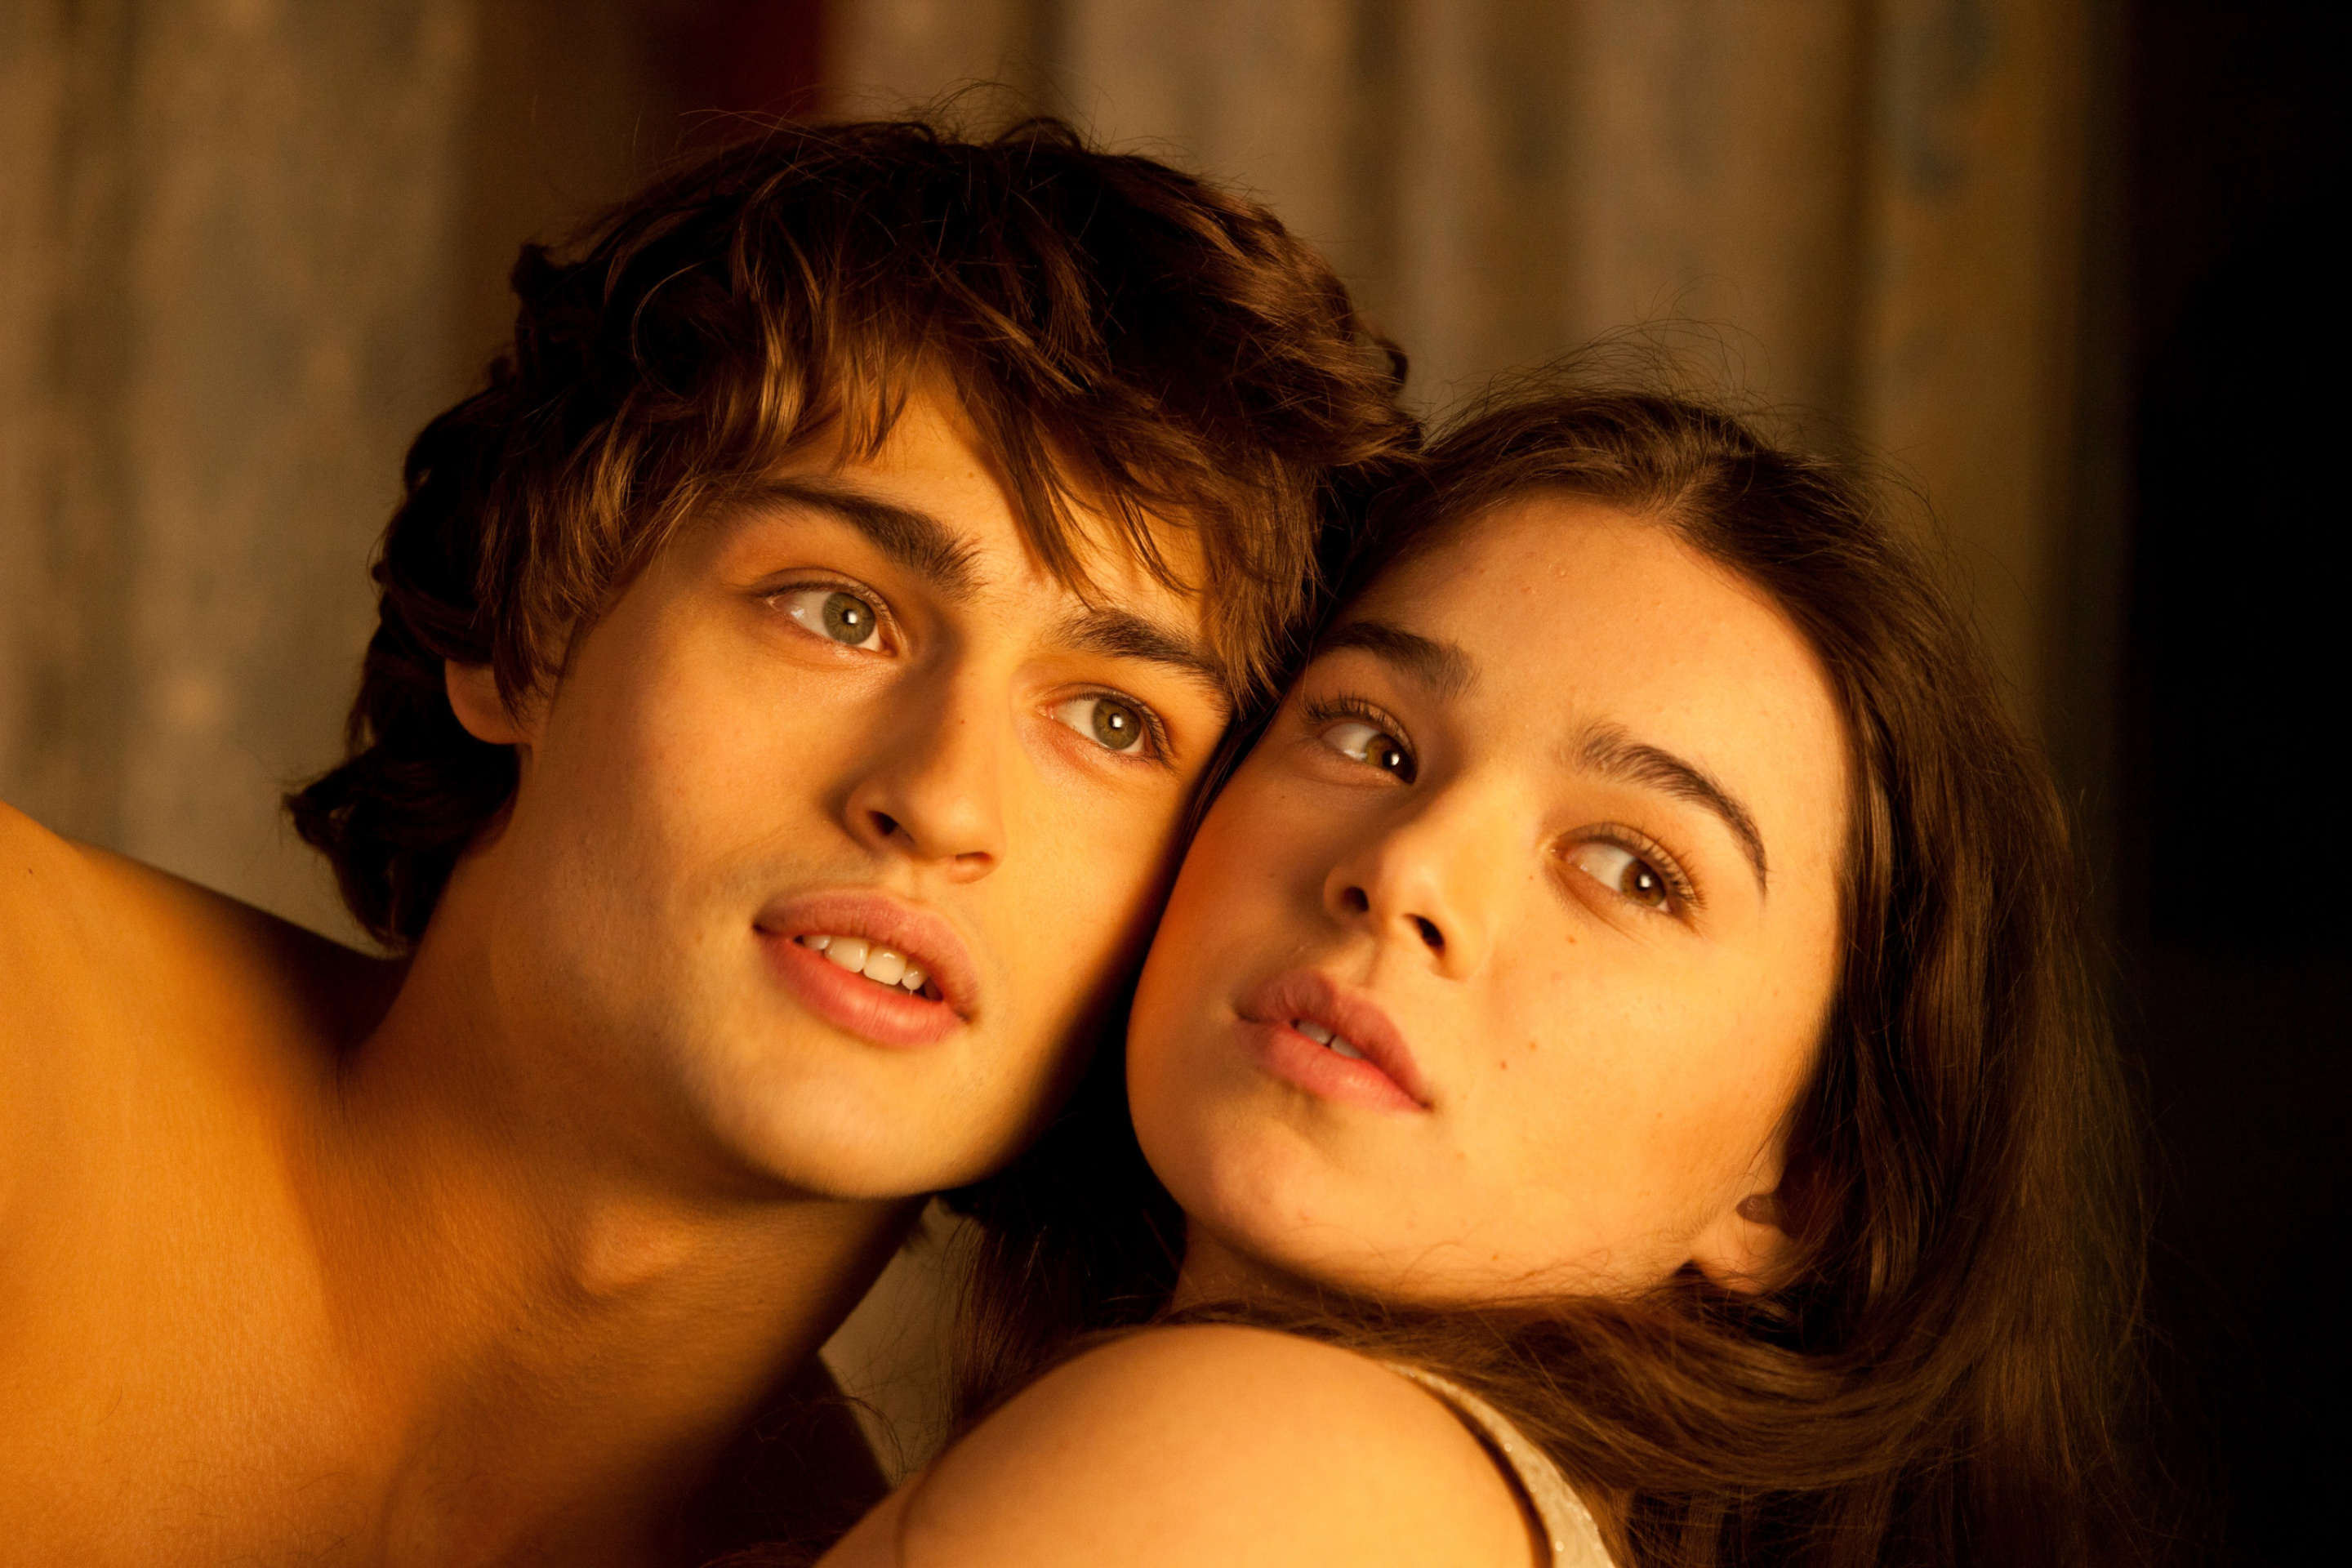 Fondo de pantalla Romeo and Juliet with Hailee Steinfeld and Douglas Booth 2880x1920